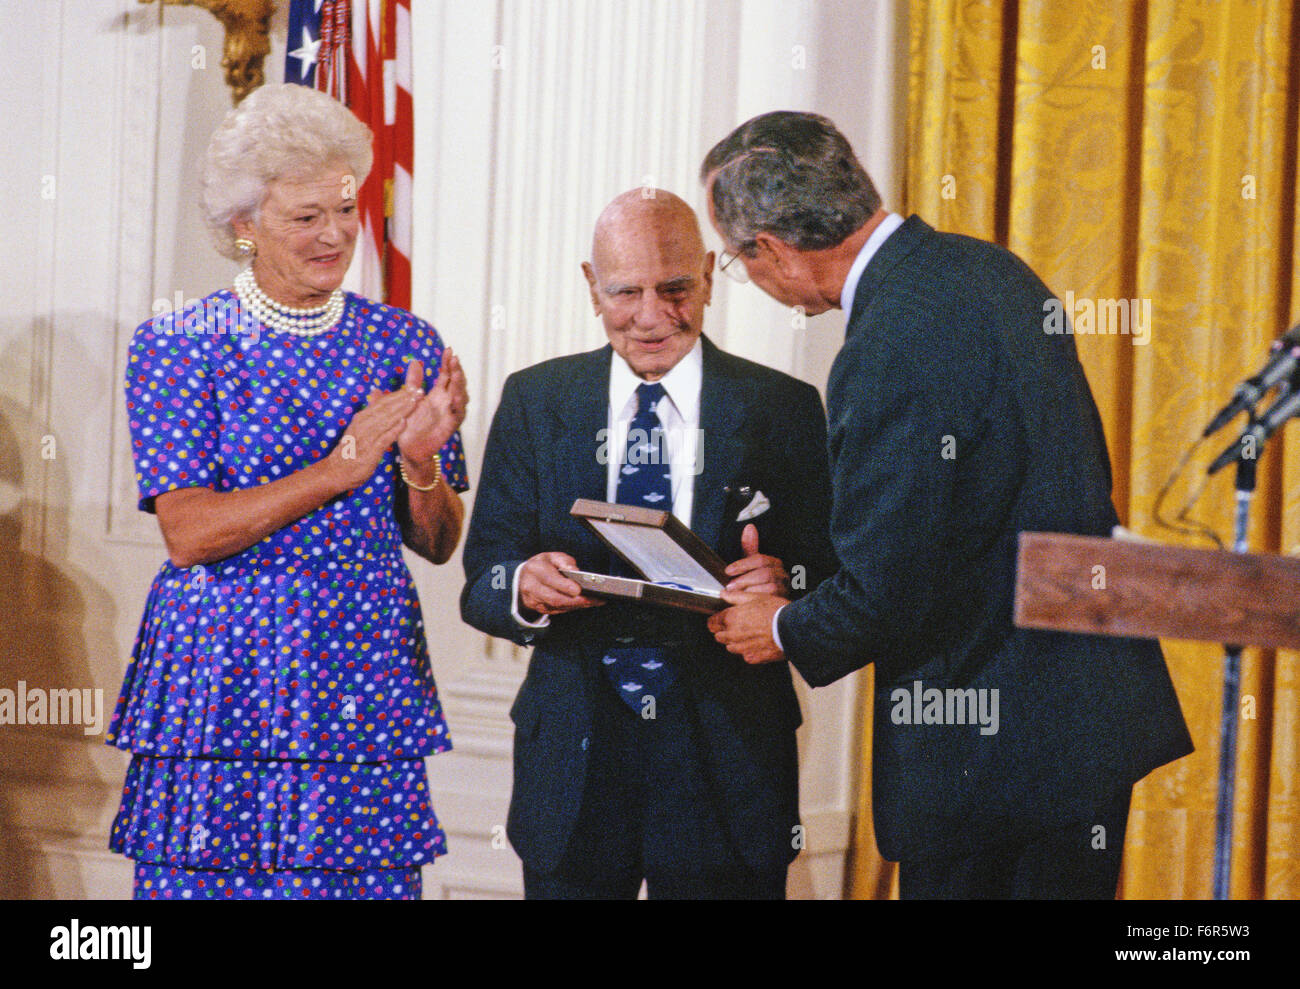 United States Air Force General Jimmy Doolittle is pictured during the ceremony where he is awarded the Presidential Medal of Freedom, the highest civilian award of the US, by US President George H.W. Bush and first lady Barbara Bush in the East Room of the White House in Washington, DC on July 6, 1989. Doolittle was known for his development of instrument flying and for leading a 1942 air raid on Tokyo, Japan, for which he received the Medal of Honor. Credit: Ron Sachs/CNP - NO WIRE SERVICE - Stock Photo